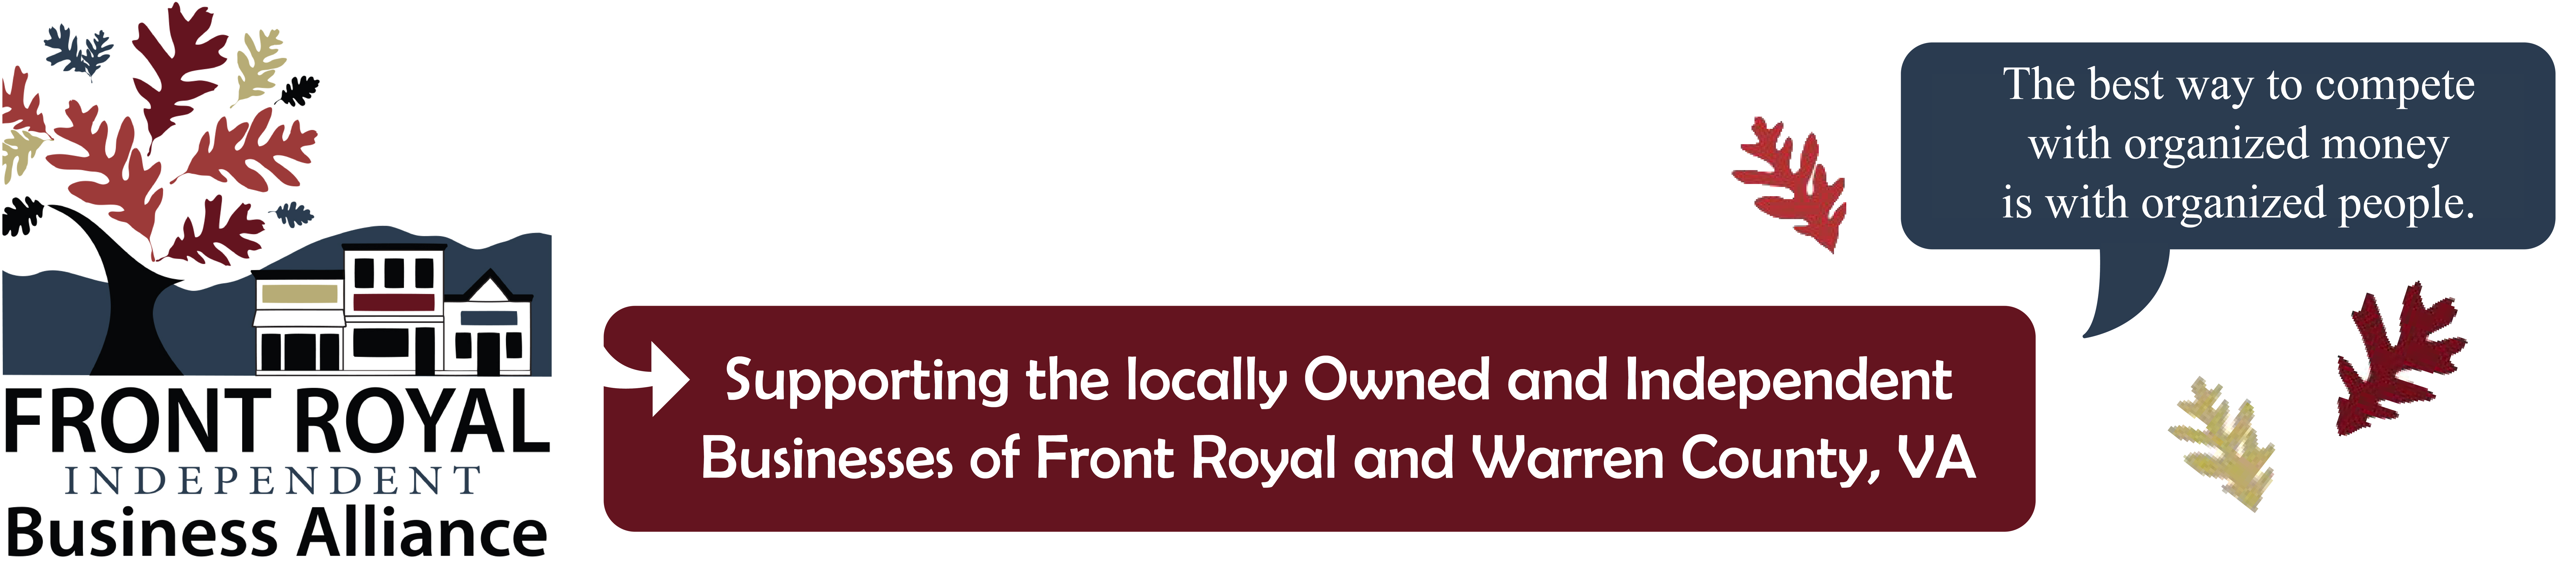 Front Royal Independent Business Alliance